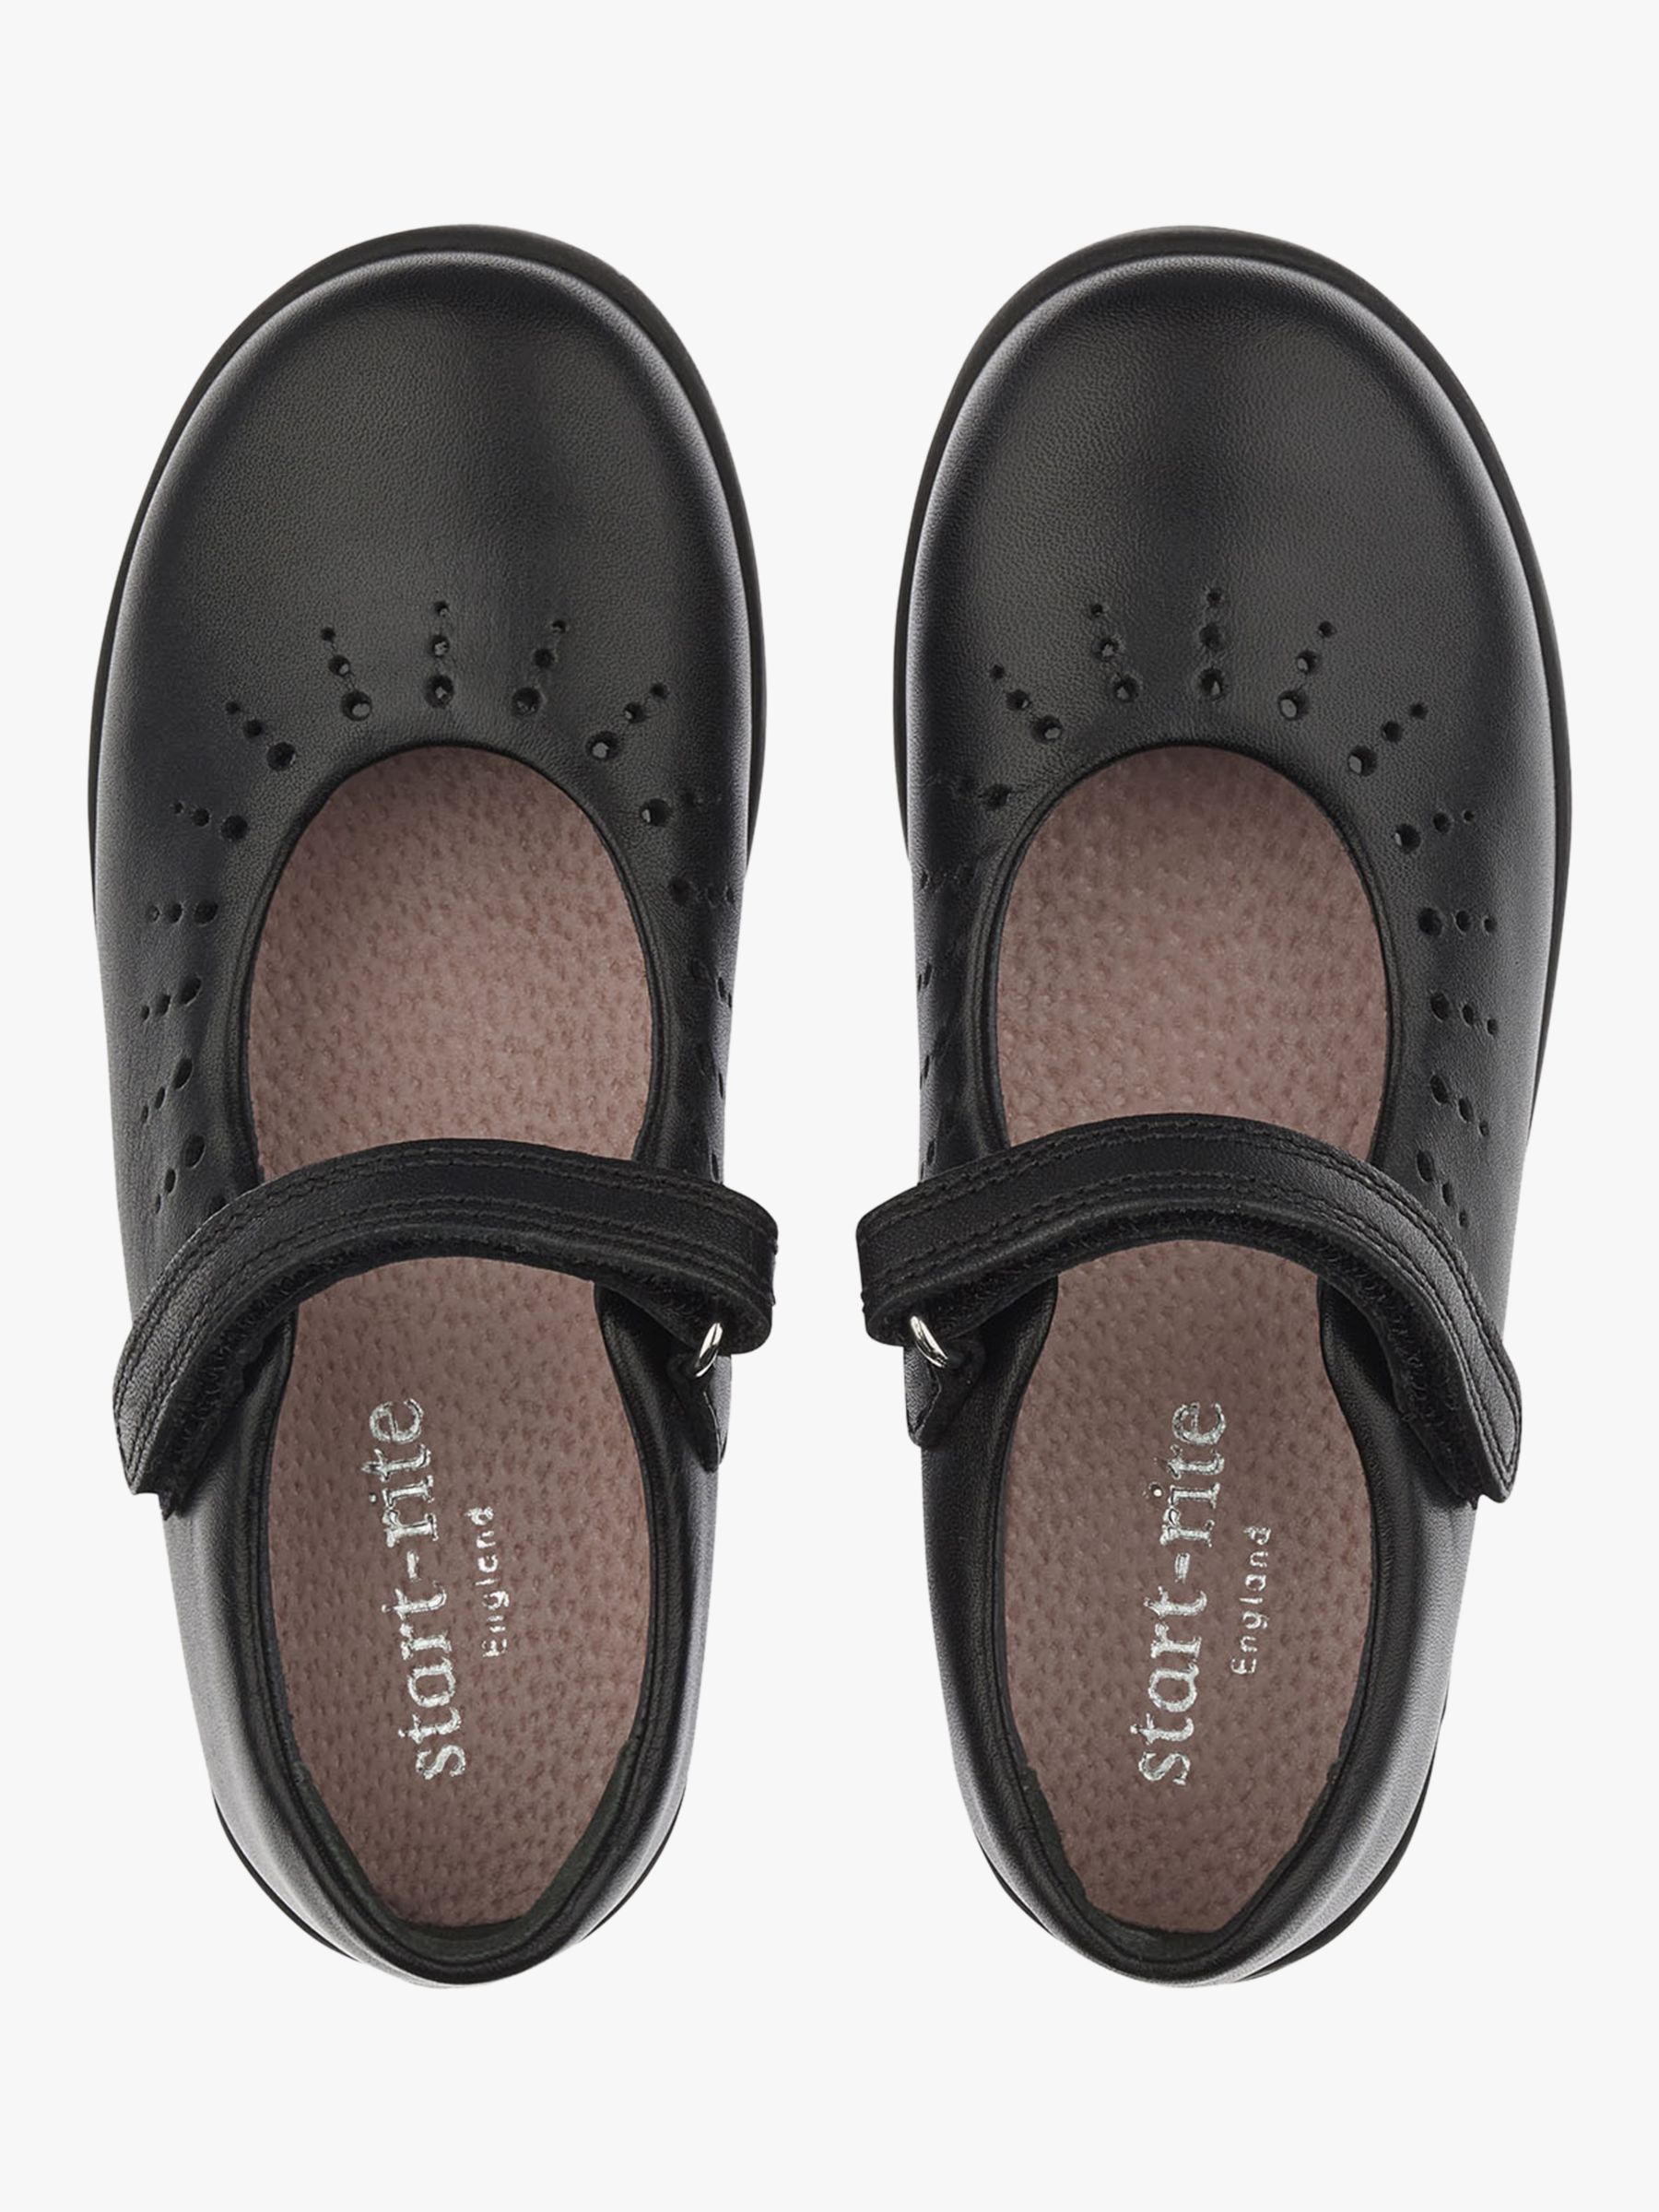 Buy Start-Rite Kids' Mary Jane Leather Shoes, Black Online at johnlewis.com